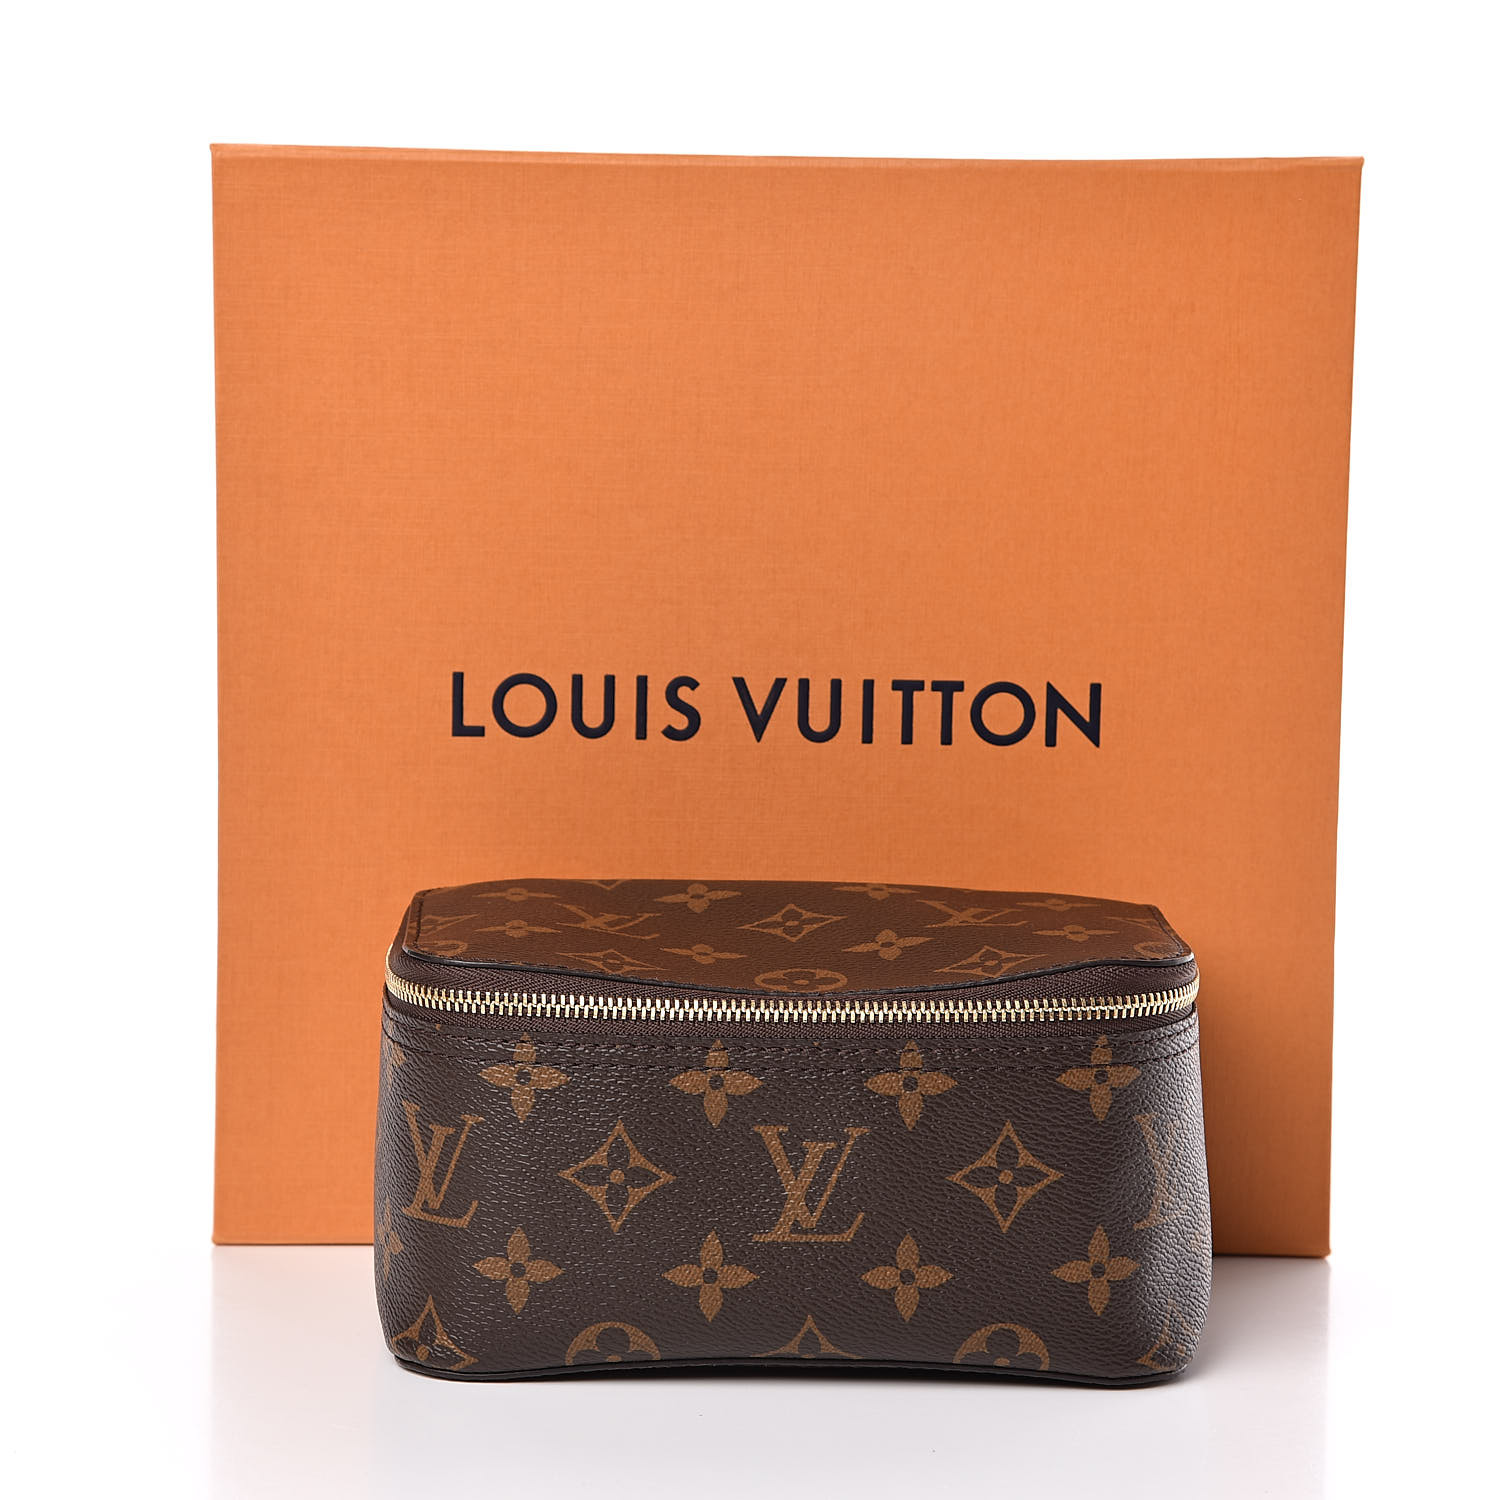 Cozy brown Wellsoft fabric with LV inspired Monogram print